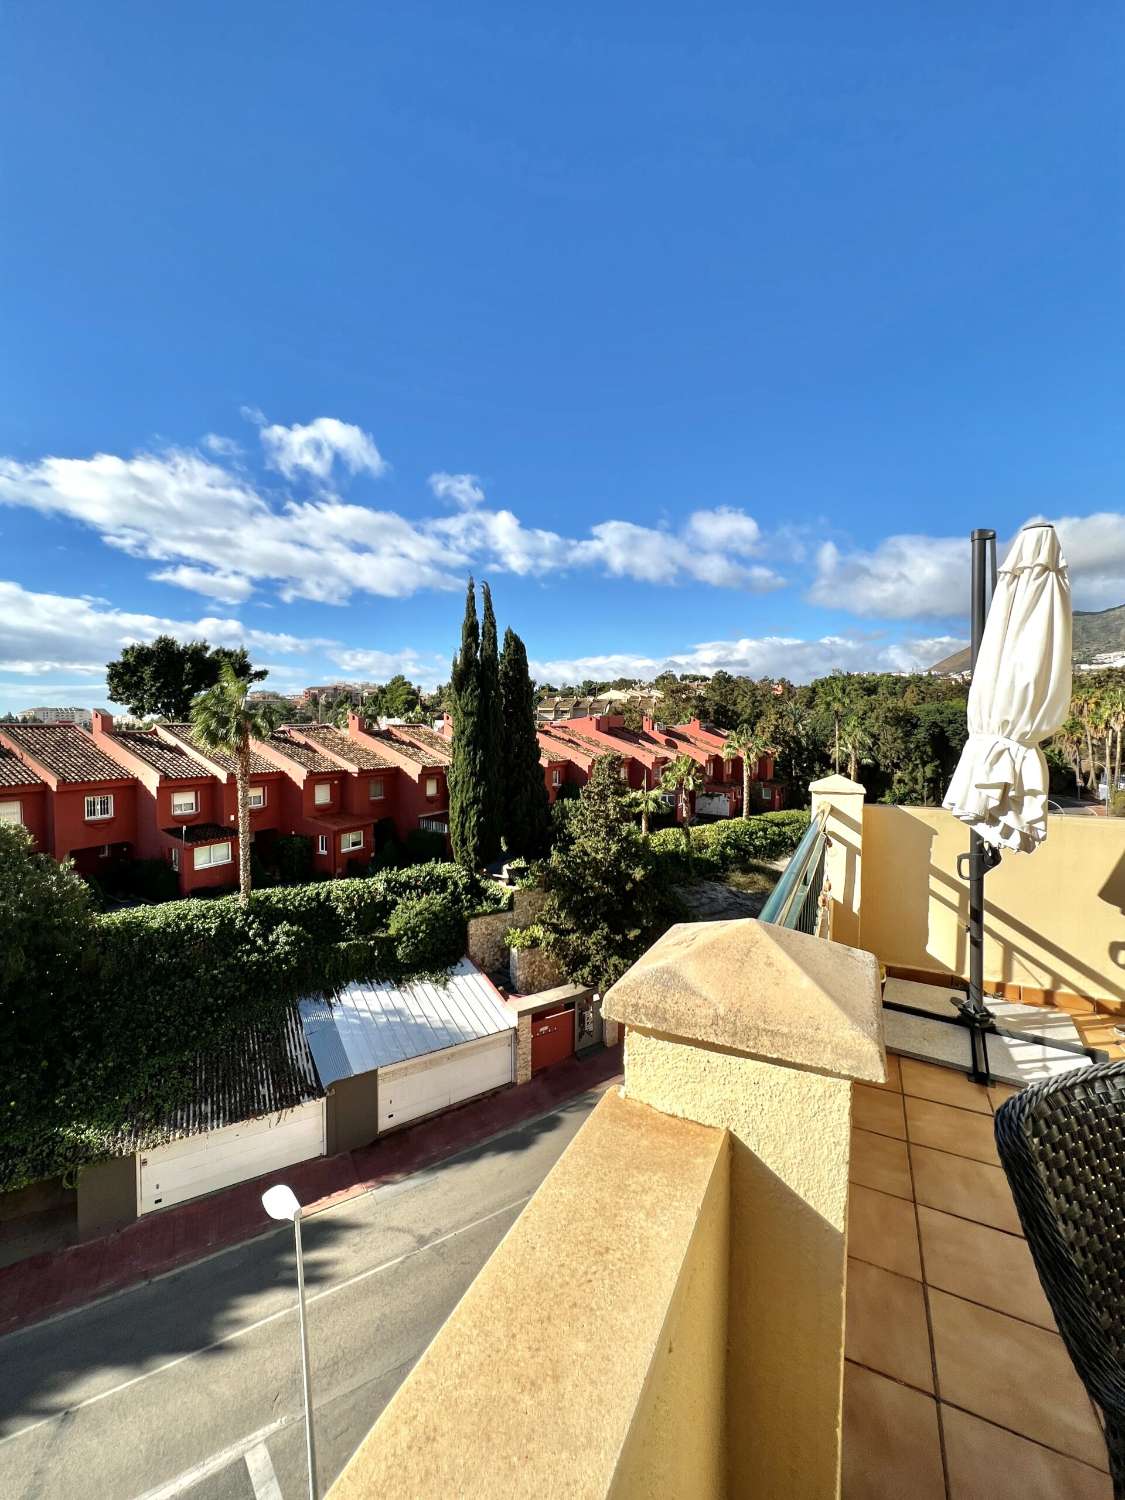 Beautifully Positioned flat in the Golf-Side Community of Doña Maria, Torrequebrada, Benalmádena.